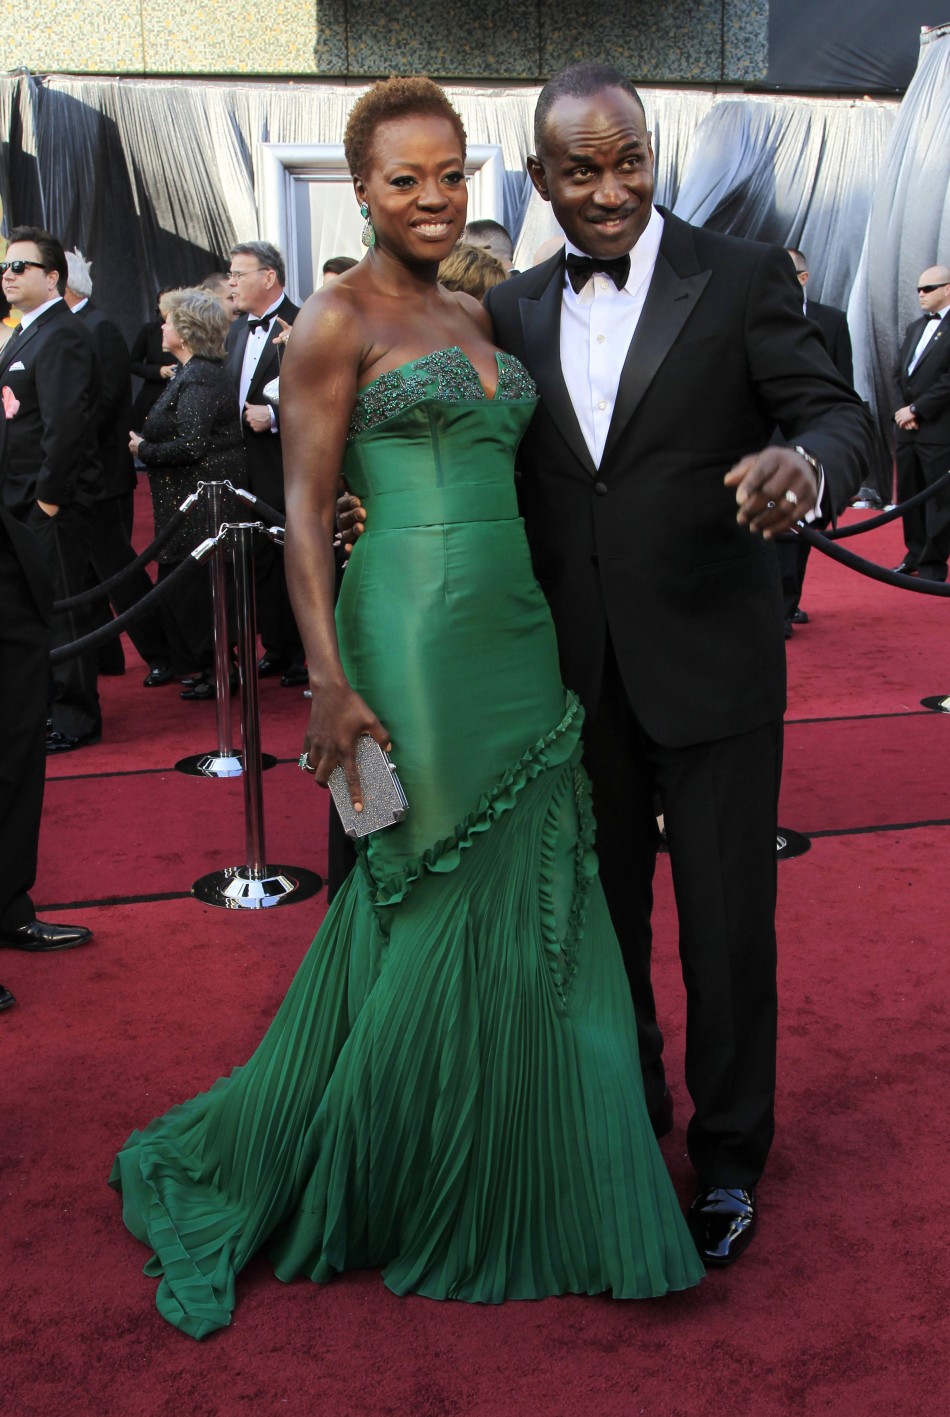 Davis, best actress nominee for her role in quotThe Helpquot, and her husband arrive at 84th Academy Awards in Hollywood